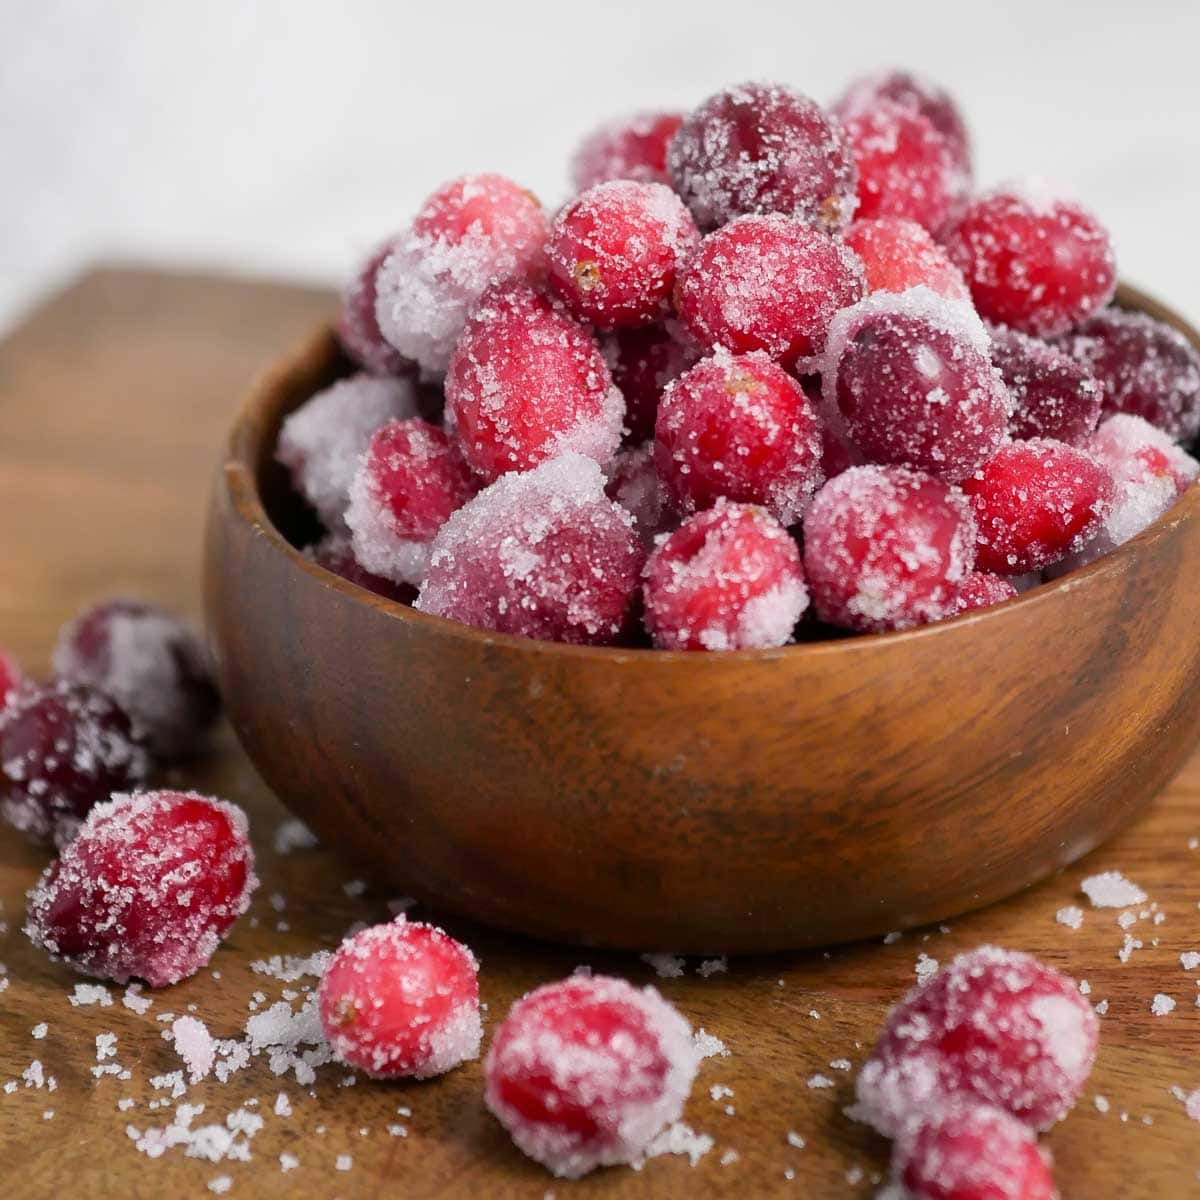 Sugared cranberries in a wooden bowl.